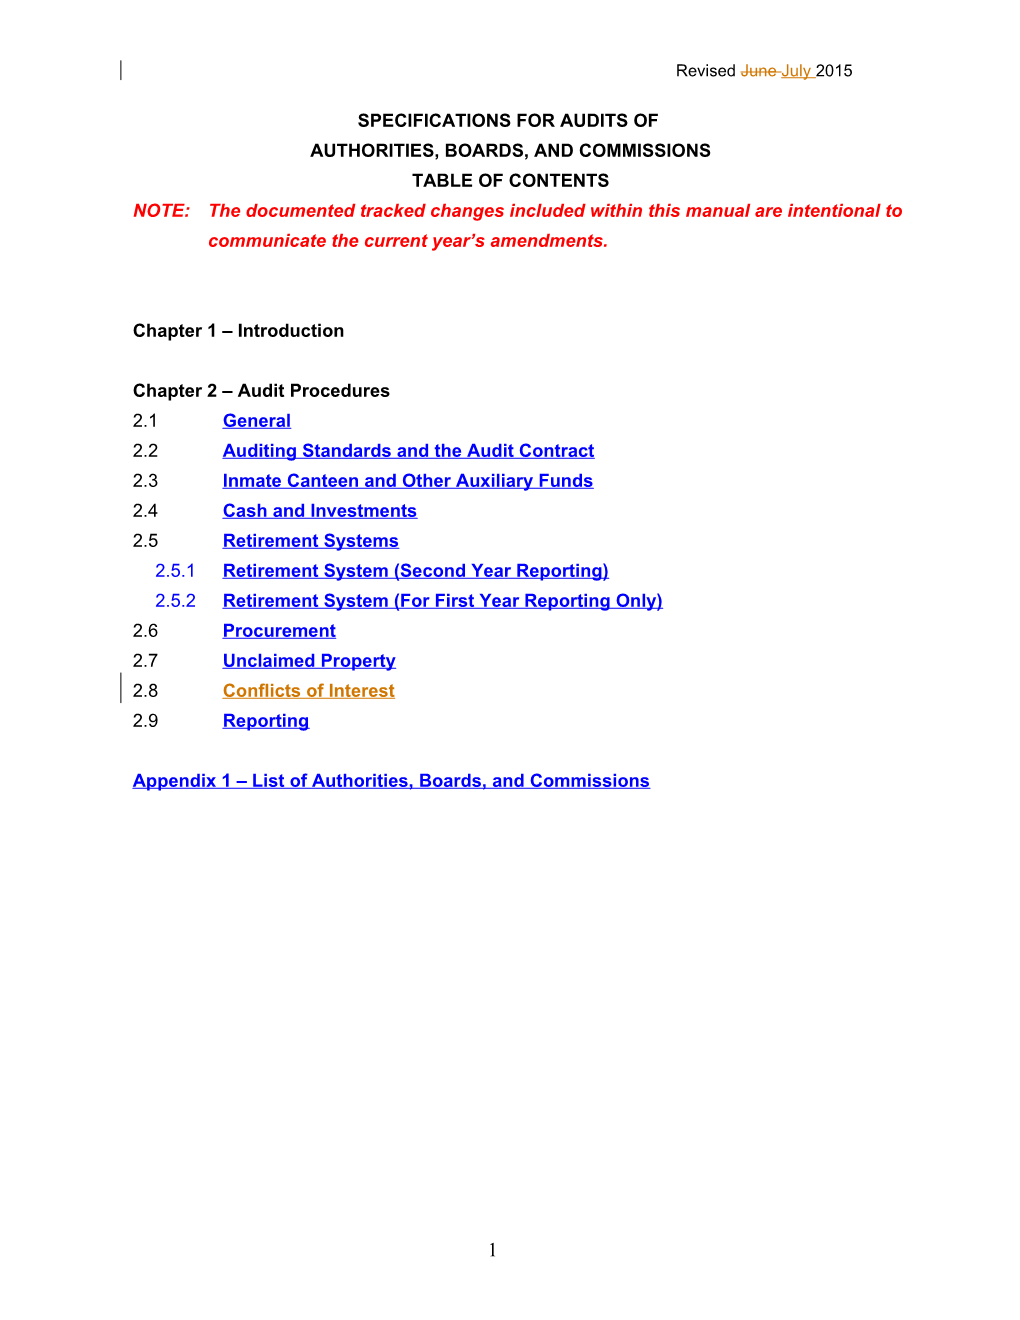 Specifications for Audits of Authorities, Boards, and Commissions